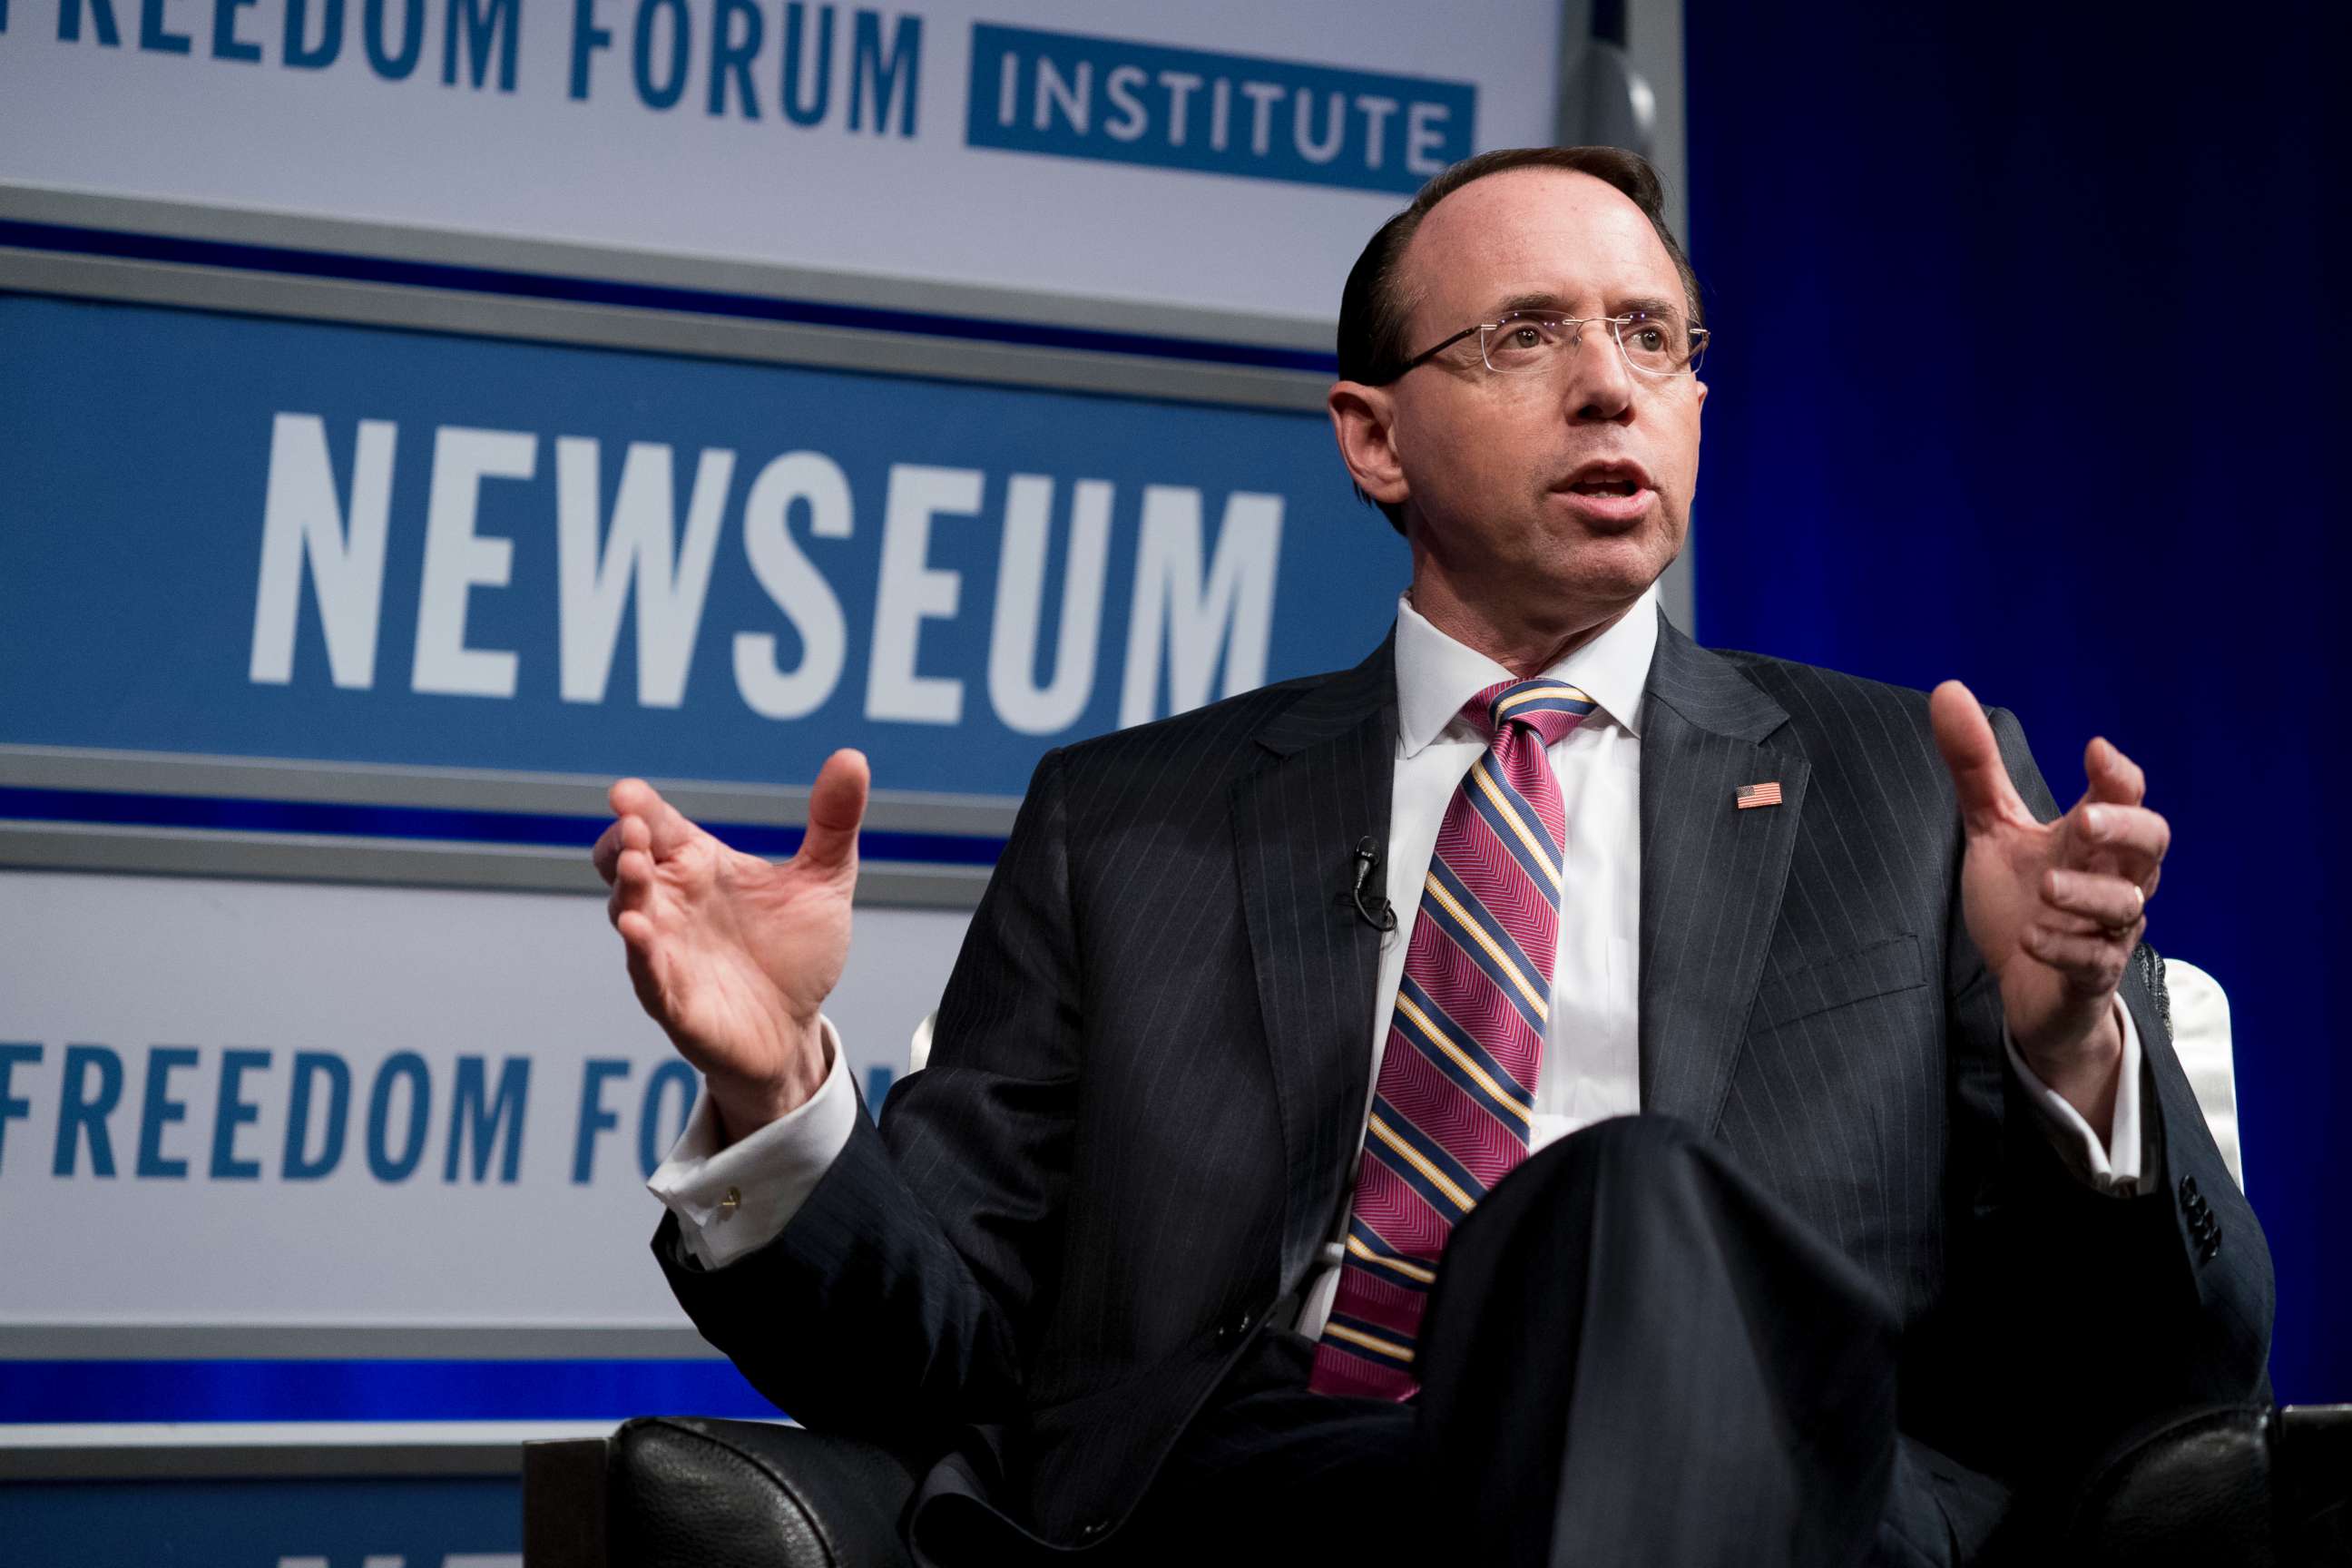 PHOTO: Deputy Attorney General Rod Rosenstein speaks during an event at the Newseum, May 1, 2018, in Washington D.C.